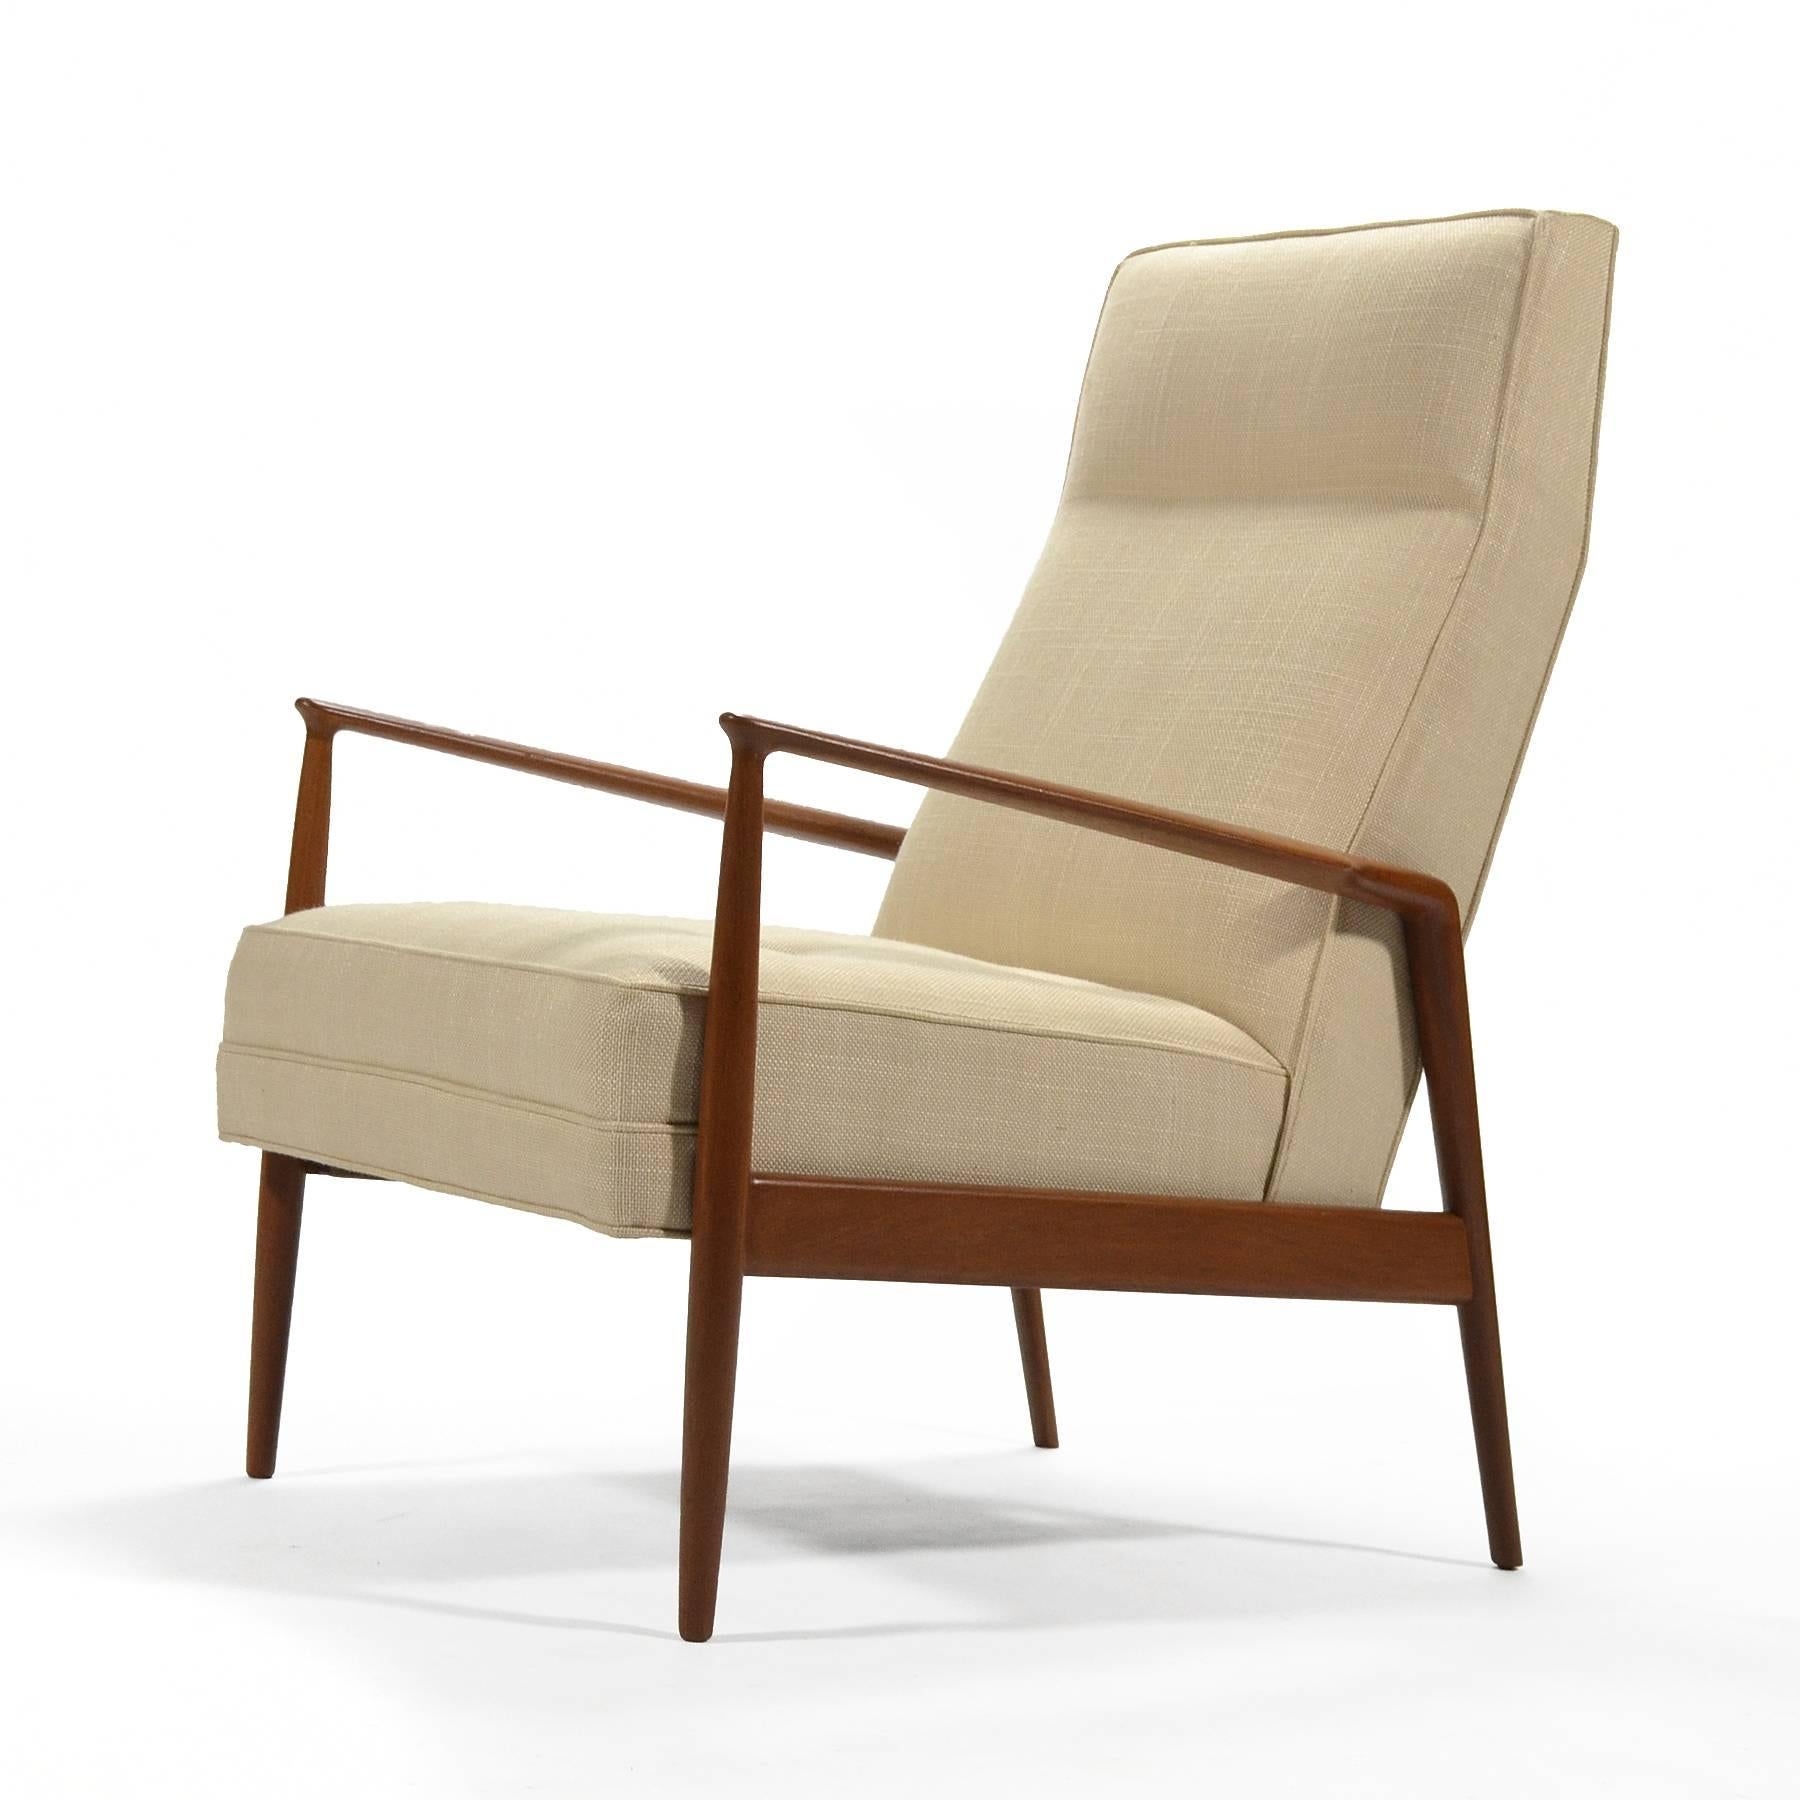 This beautiful, stately design by Kofod-Larsen is Classic Danish modern. The teak frame has wonderful sculptural details and supports an upholstered seat. Newly restored and reupholstered, this is a very stylish and comfortable lounge chair.